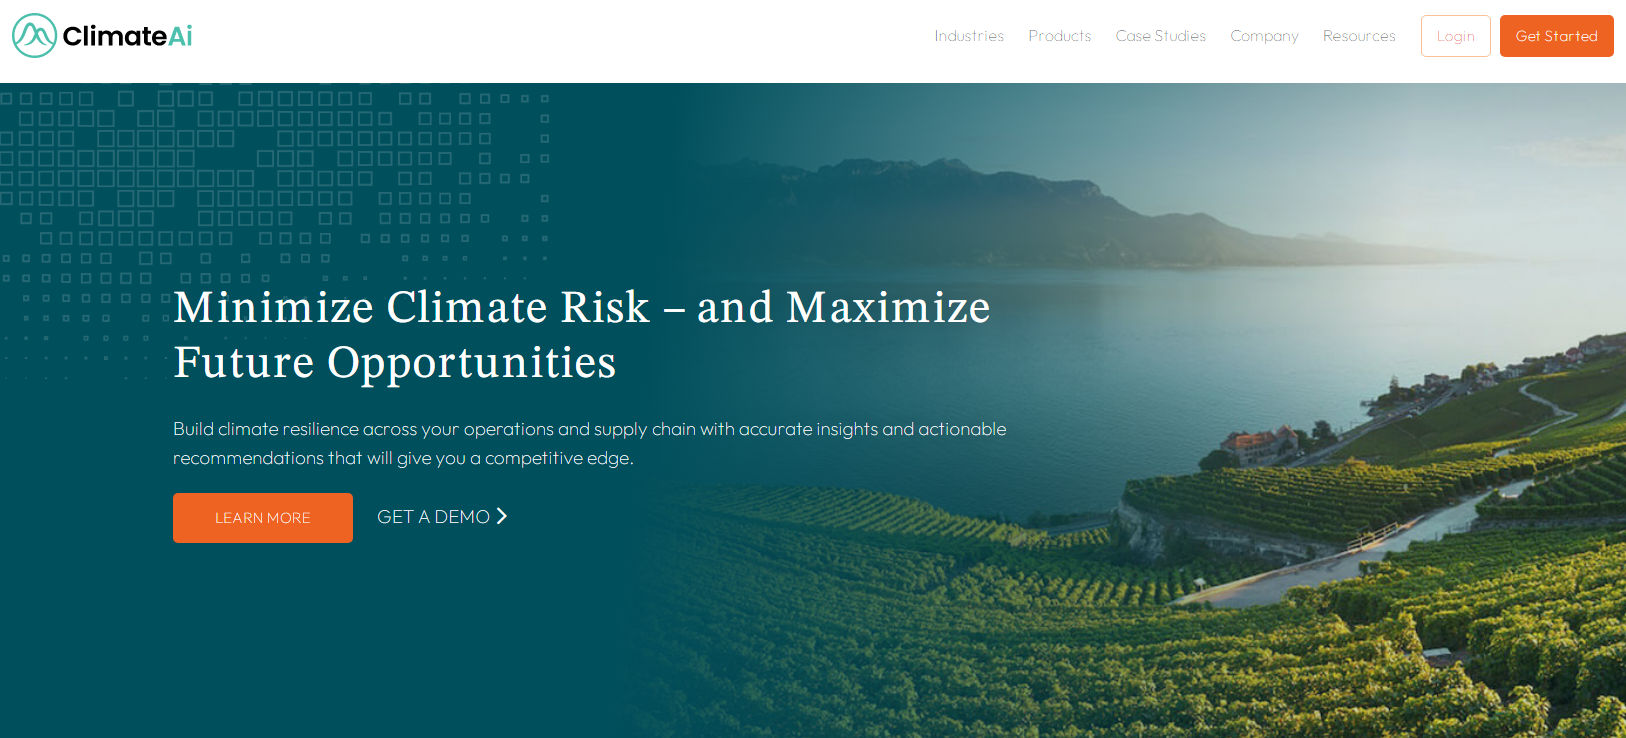 ClimateAi Raises $22M in Series B Funding to Develop a Proprietary Climate Resilience Platform.